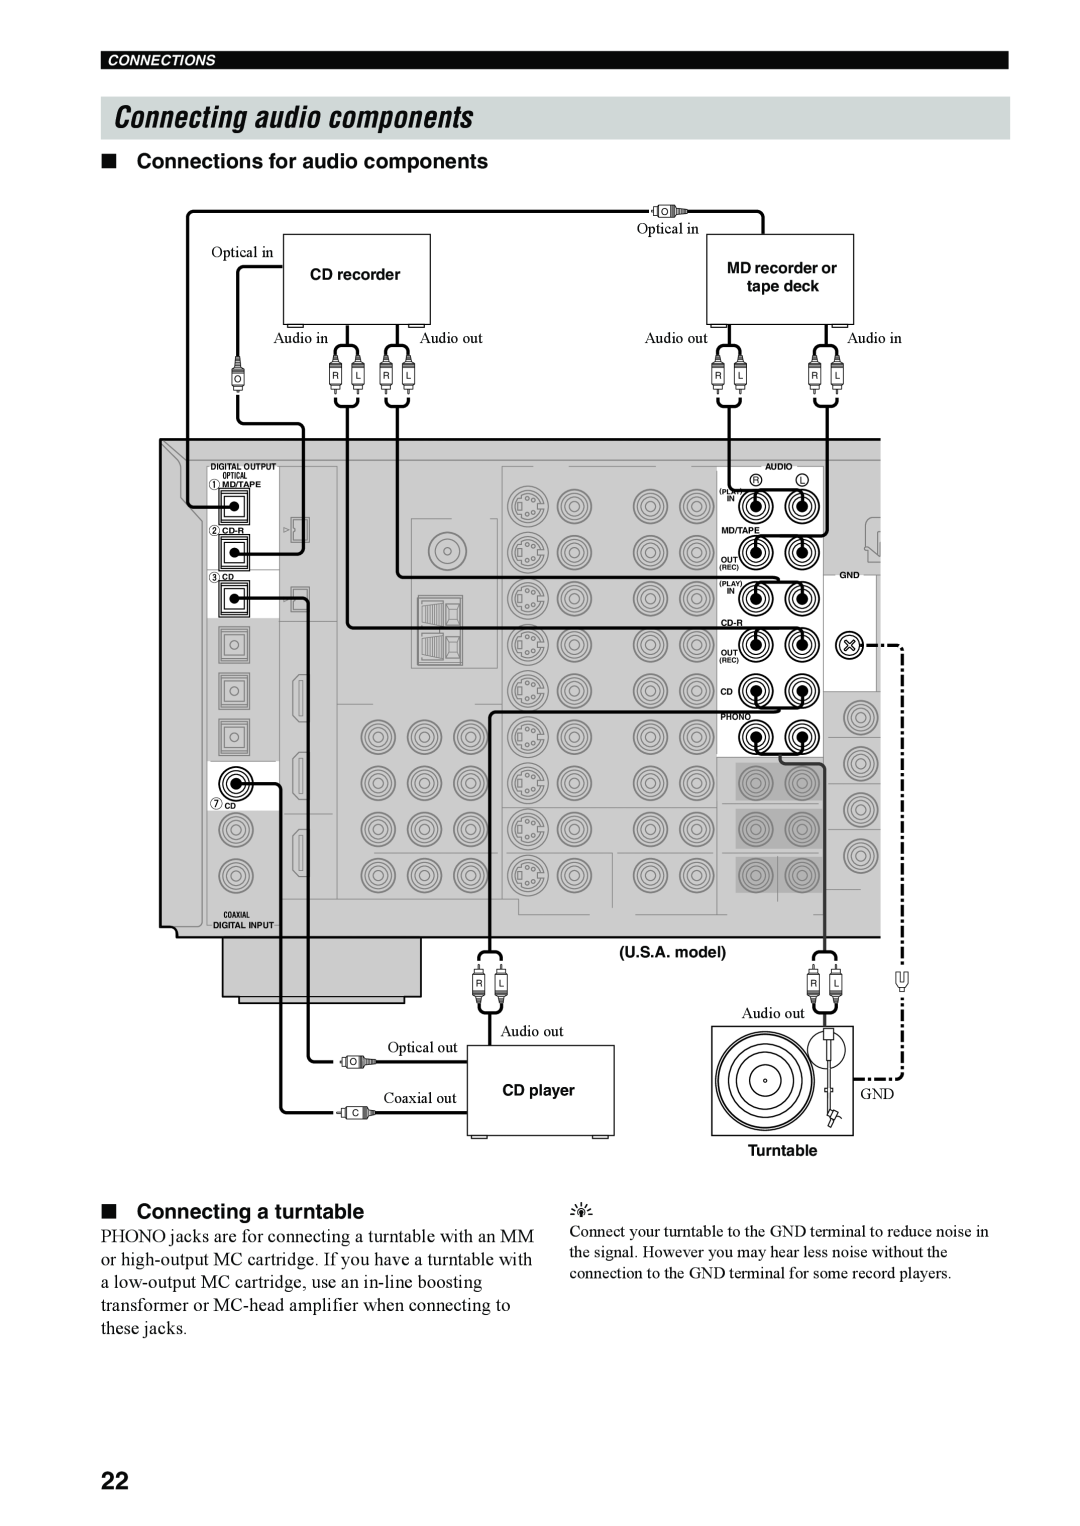 Yamaha RX-V4600 owner manual Connecting audio components, Connections for audio components, Connecting a turntable 